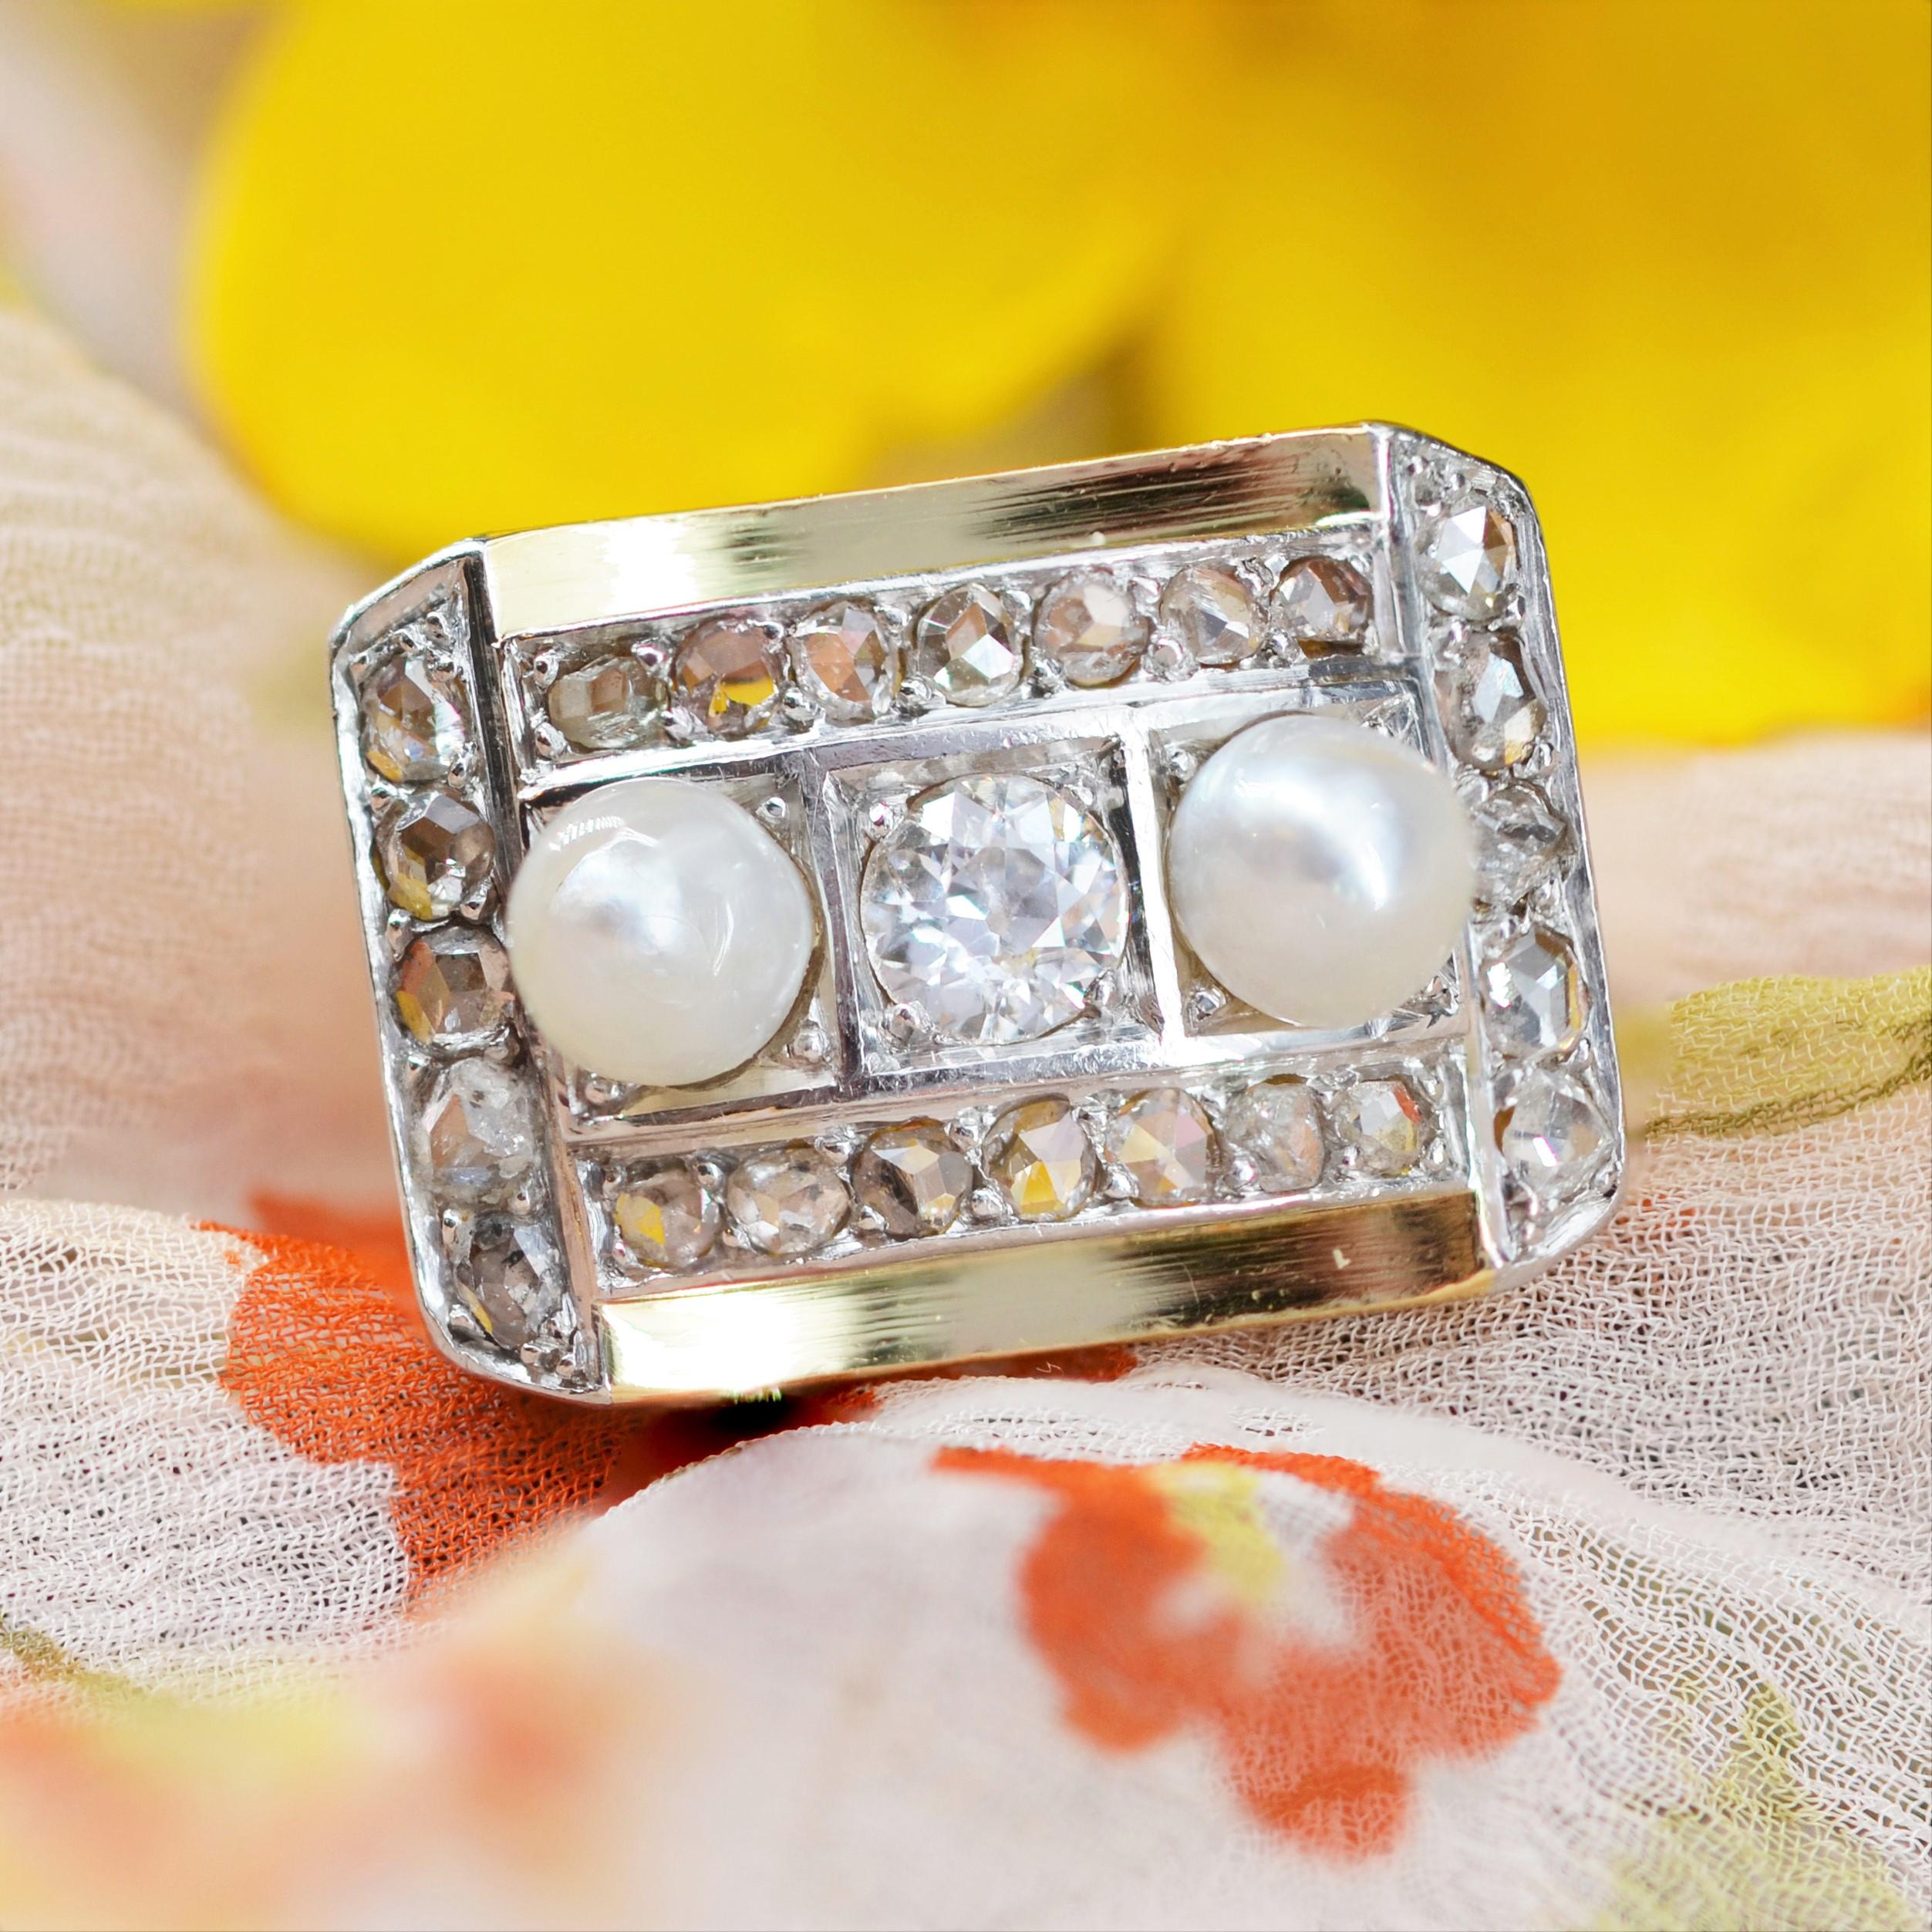 French 1940s Natural Pearl Diamonds 18 Karat Yellow Gold Tank Ring For Sale 7